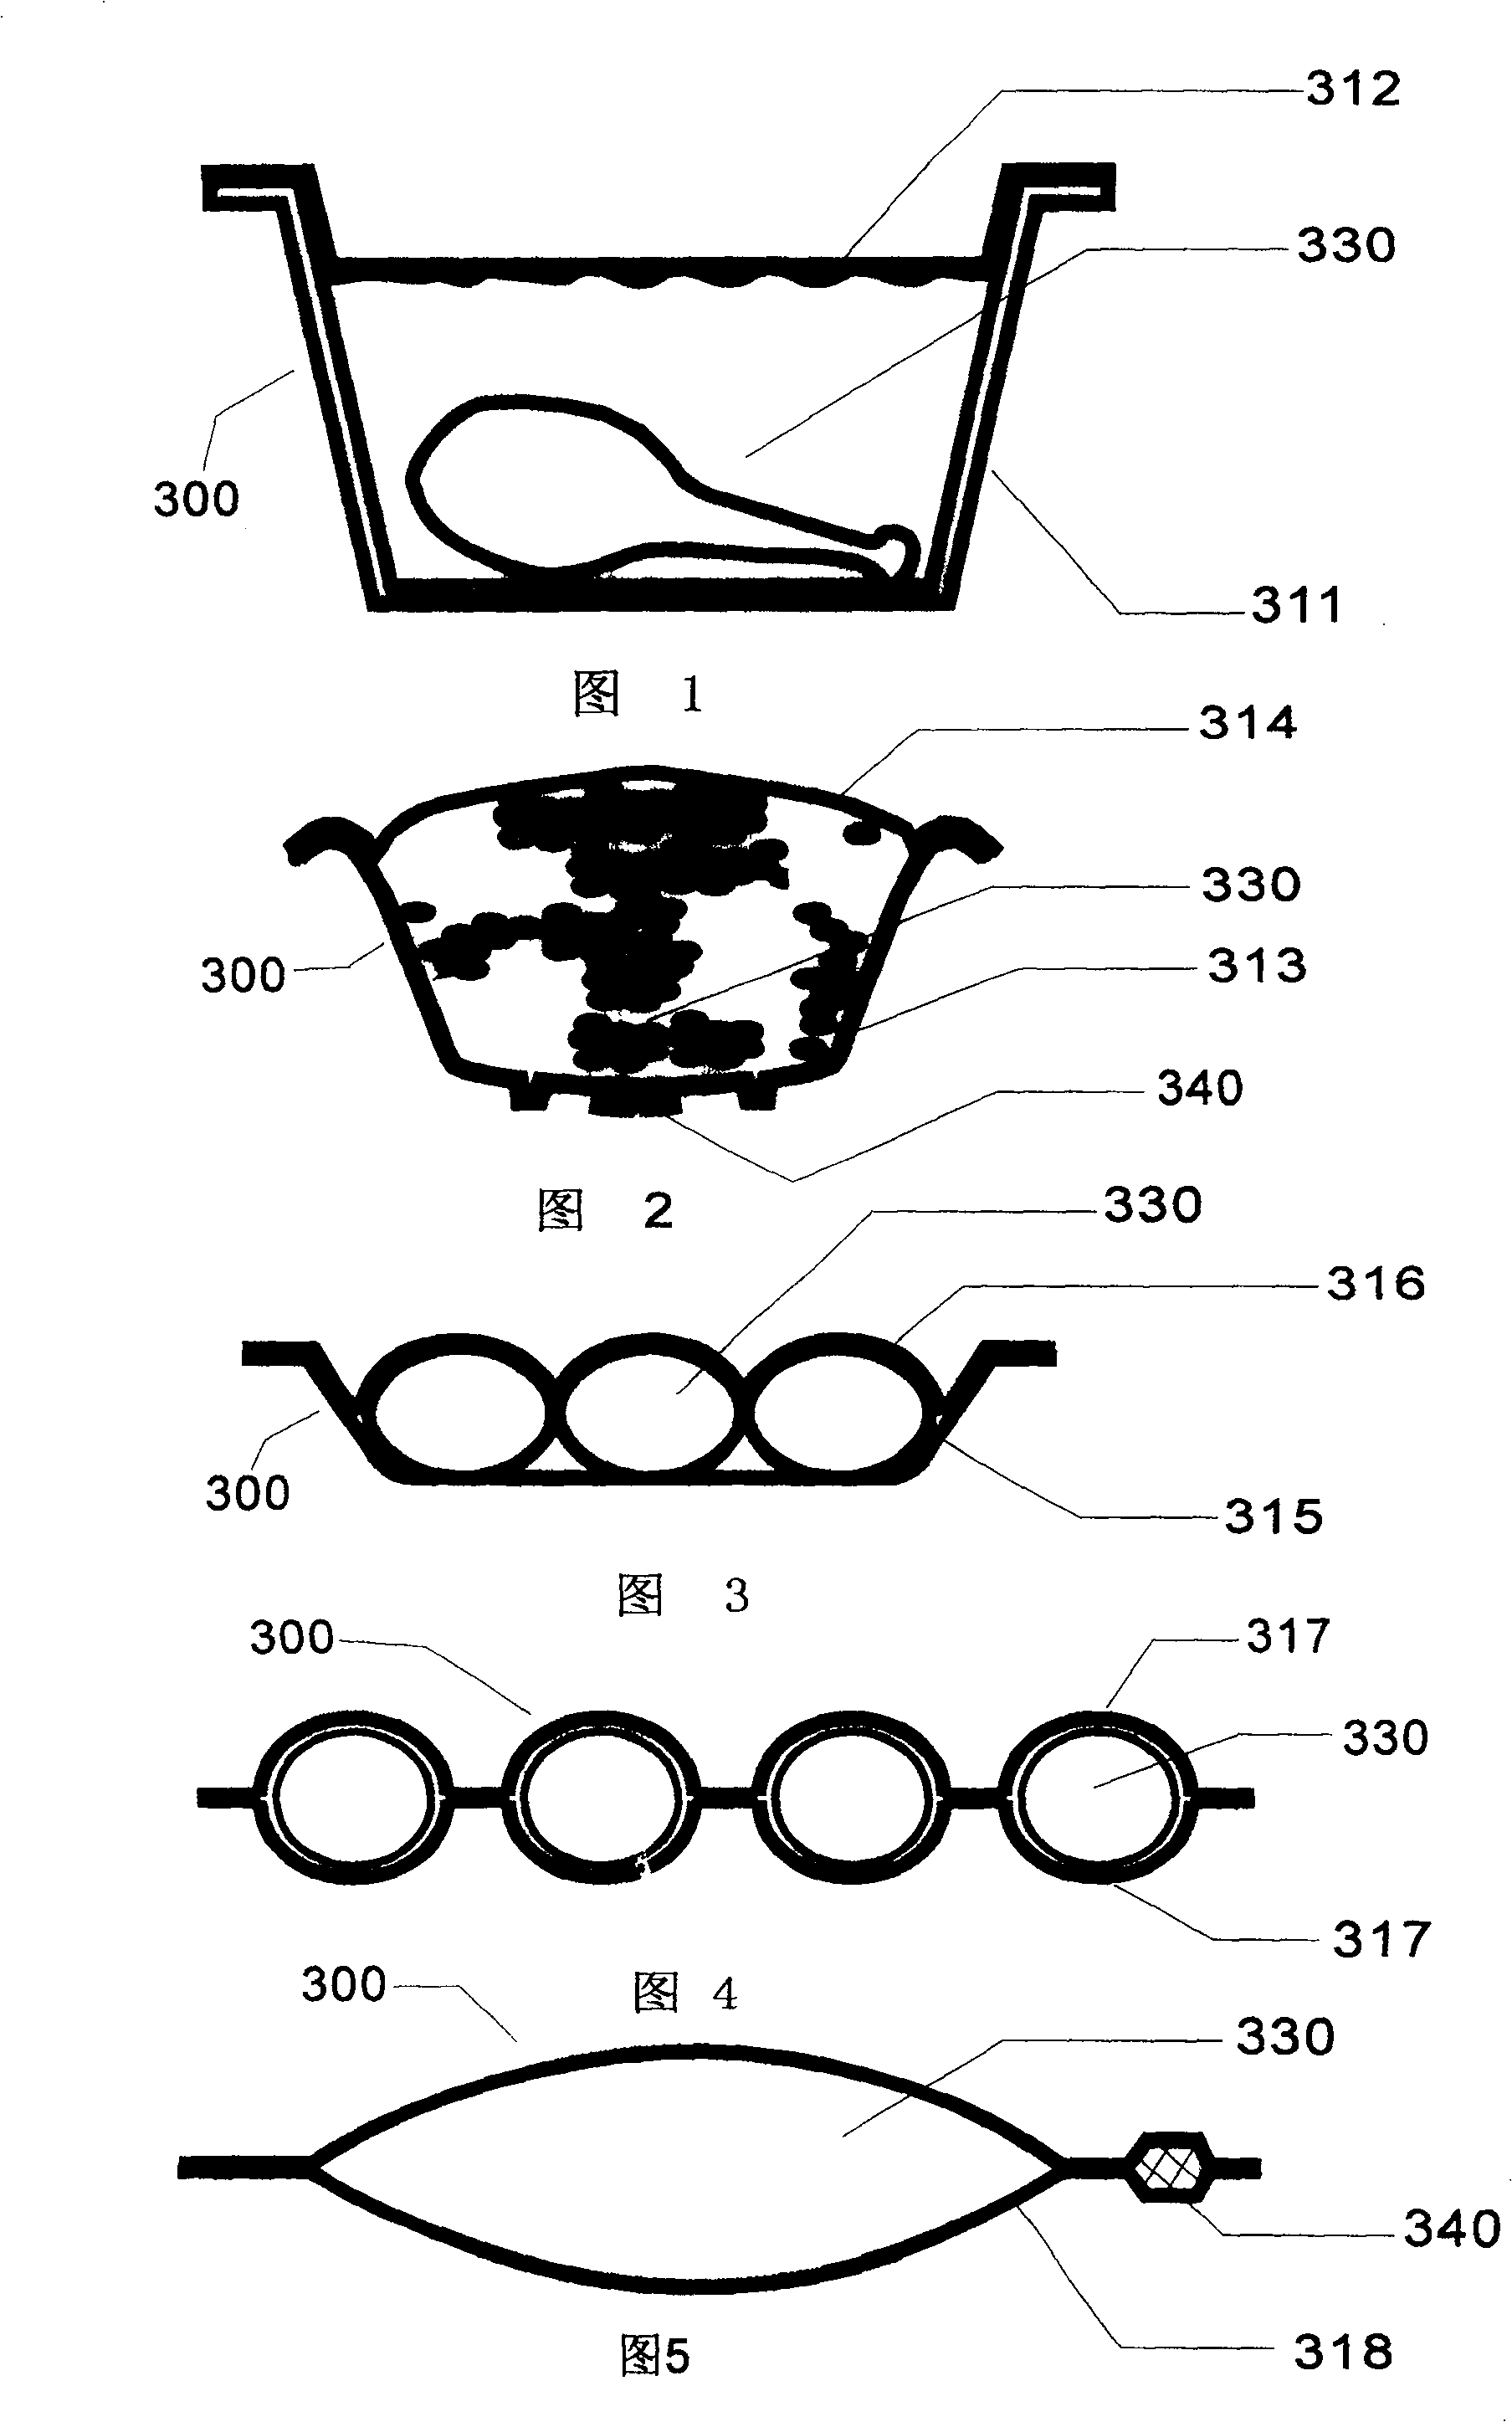 Instant meal producing, storing and transporting process and apparatus